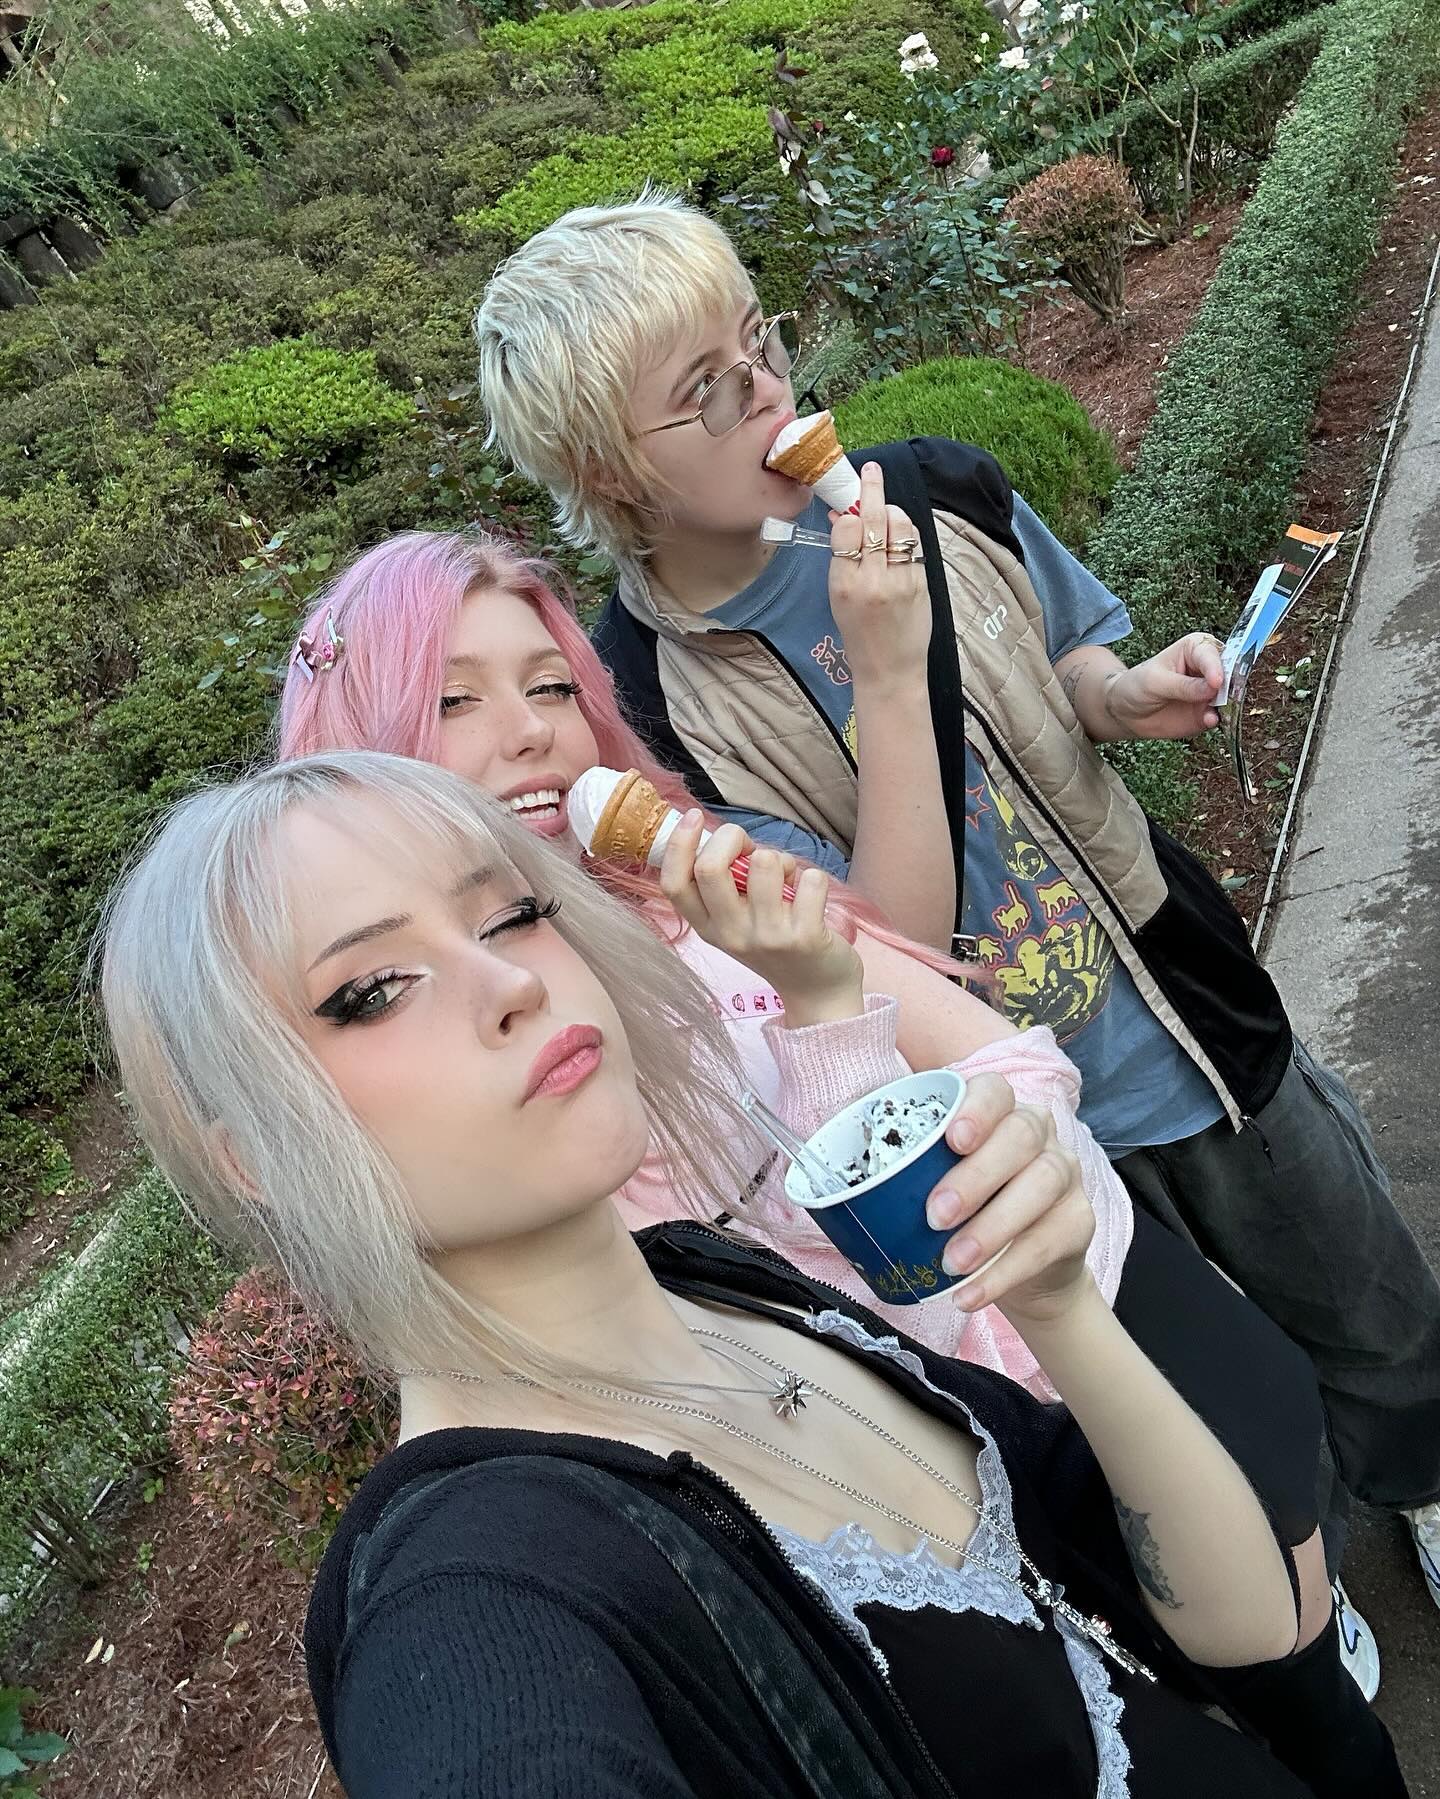 Rose festival in Tokyo with @linzor and @m.archh 🥀🖤